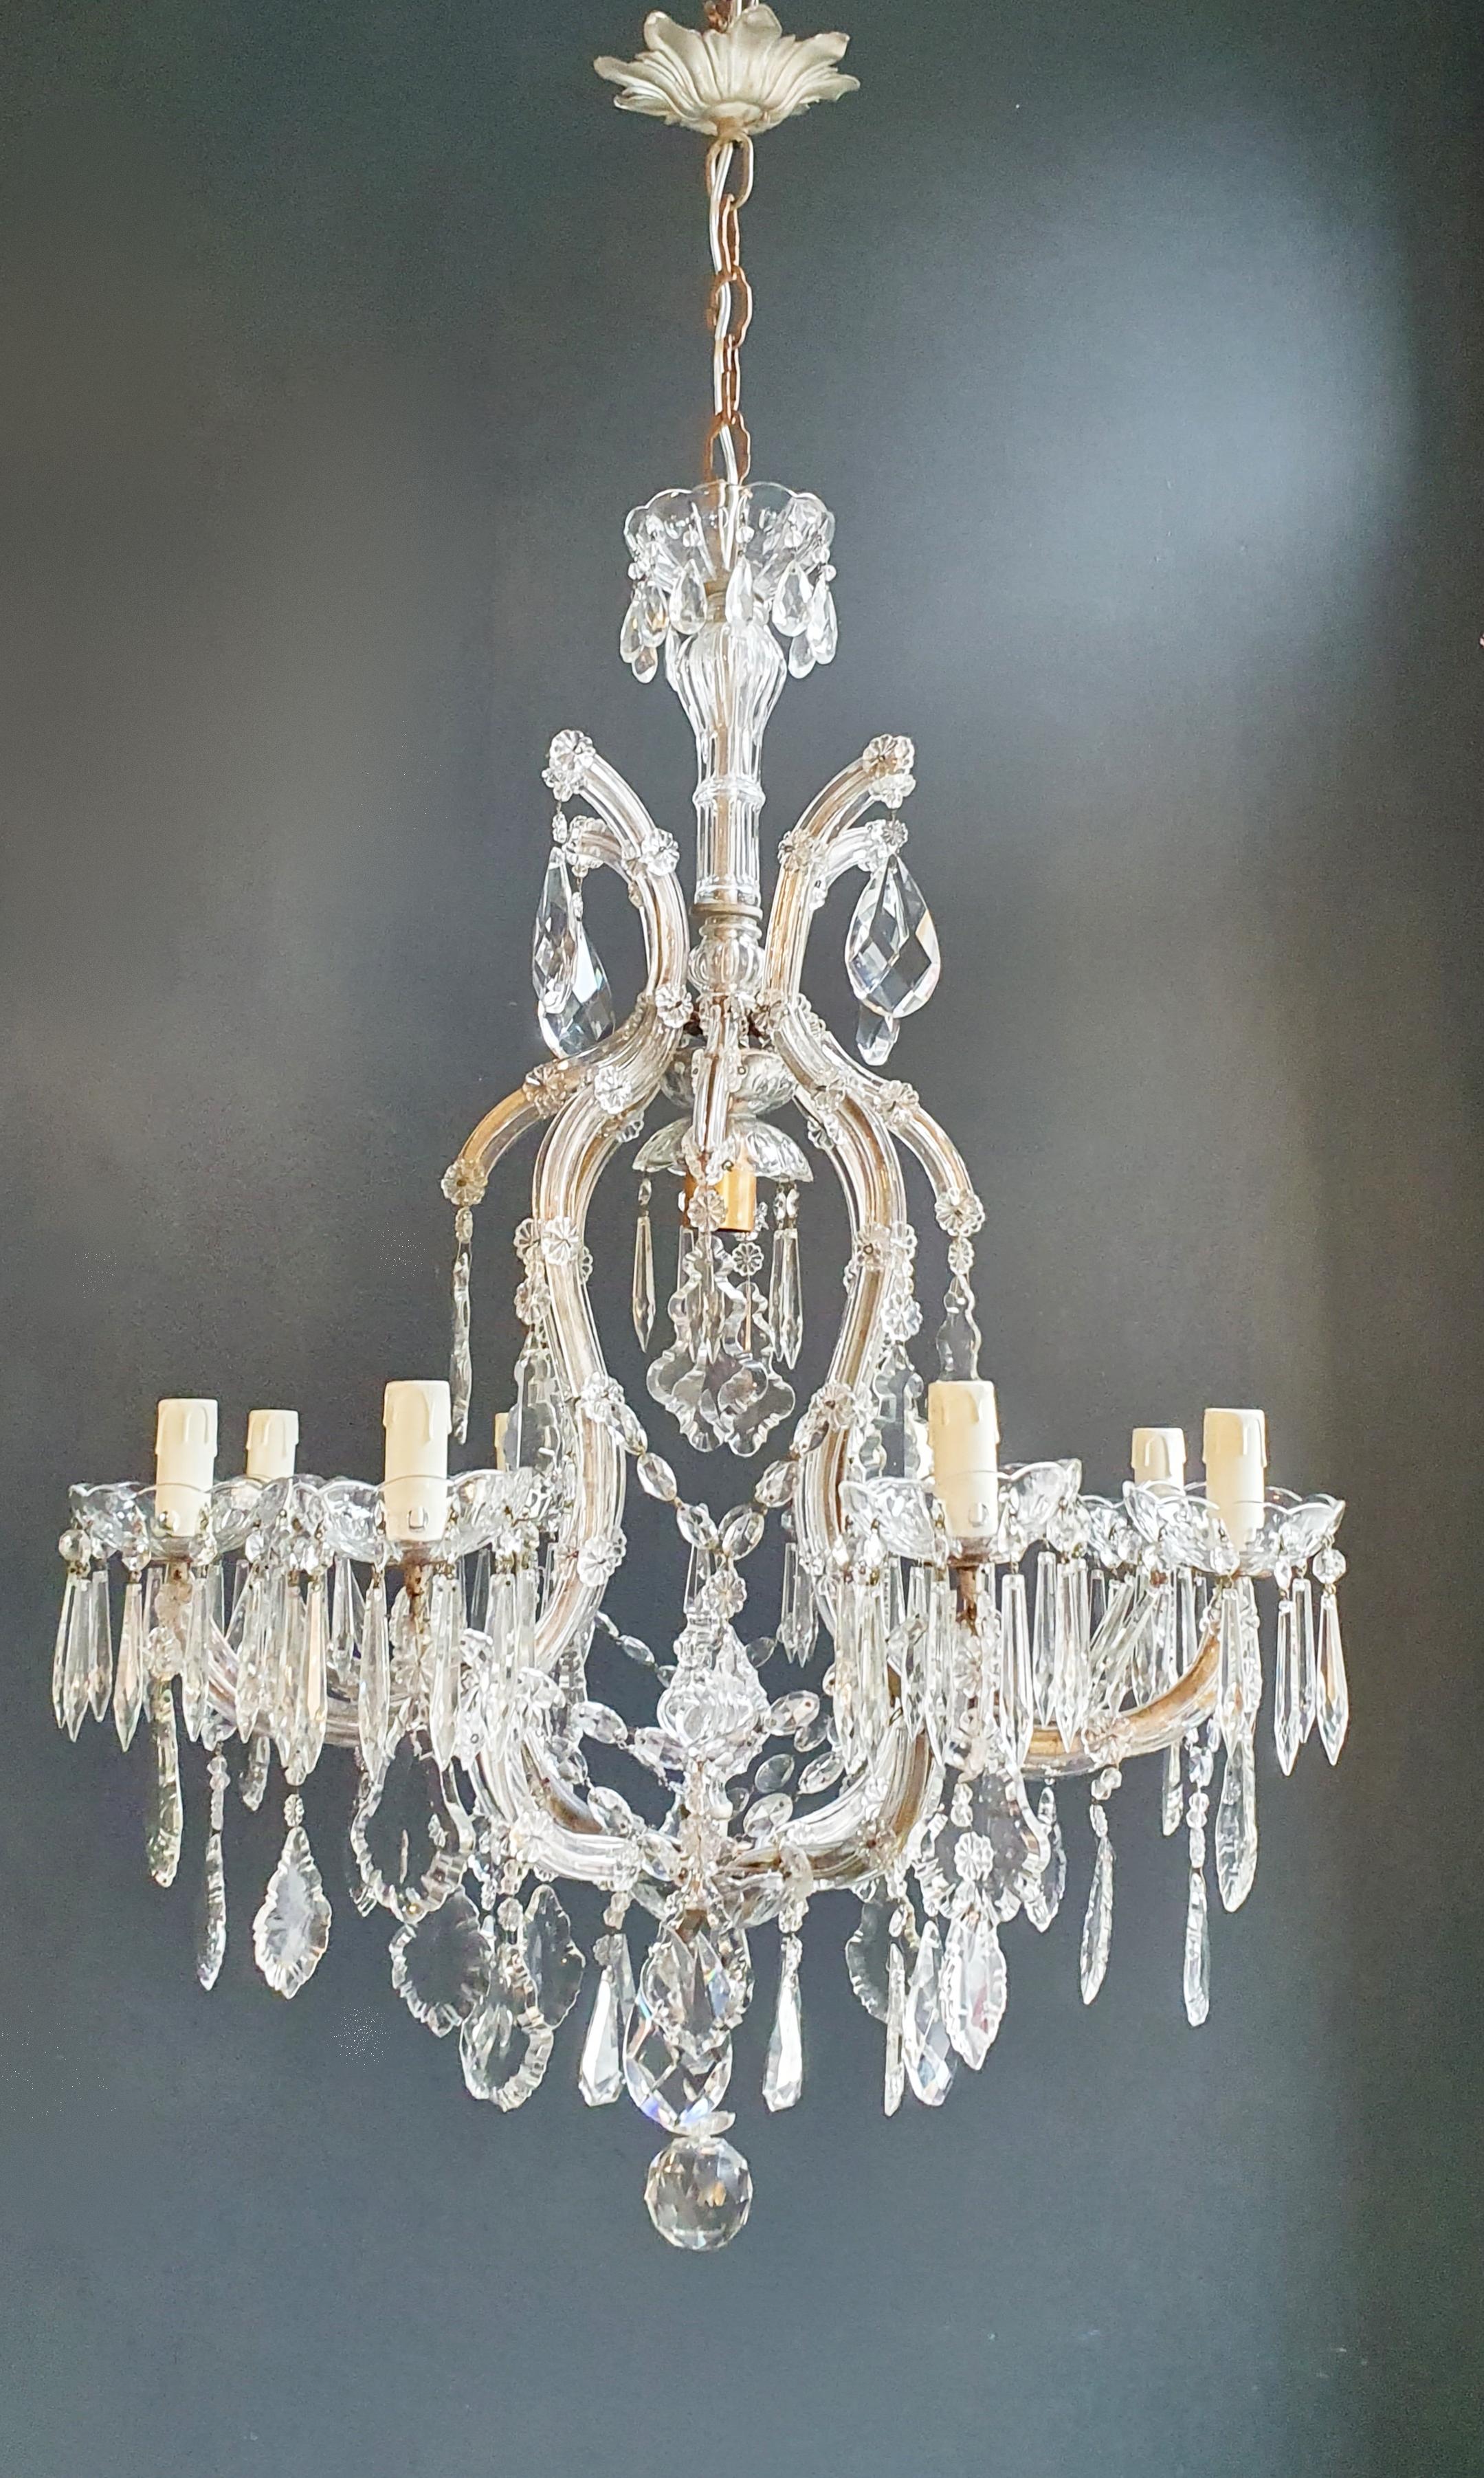 Baroque Maria Theresa Crystal Chandelier Antique Classic Clear Glass For Sale